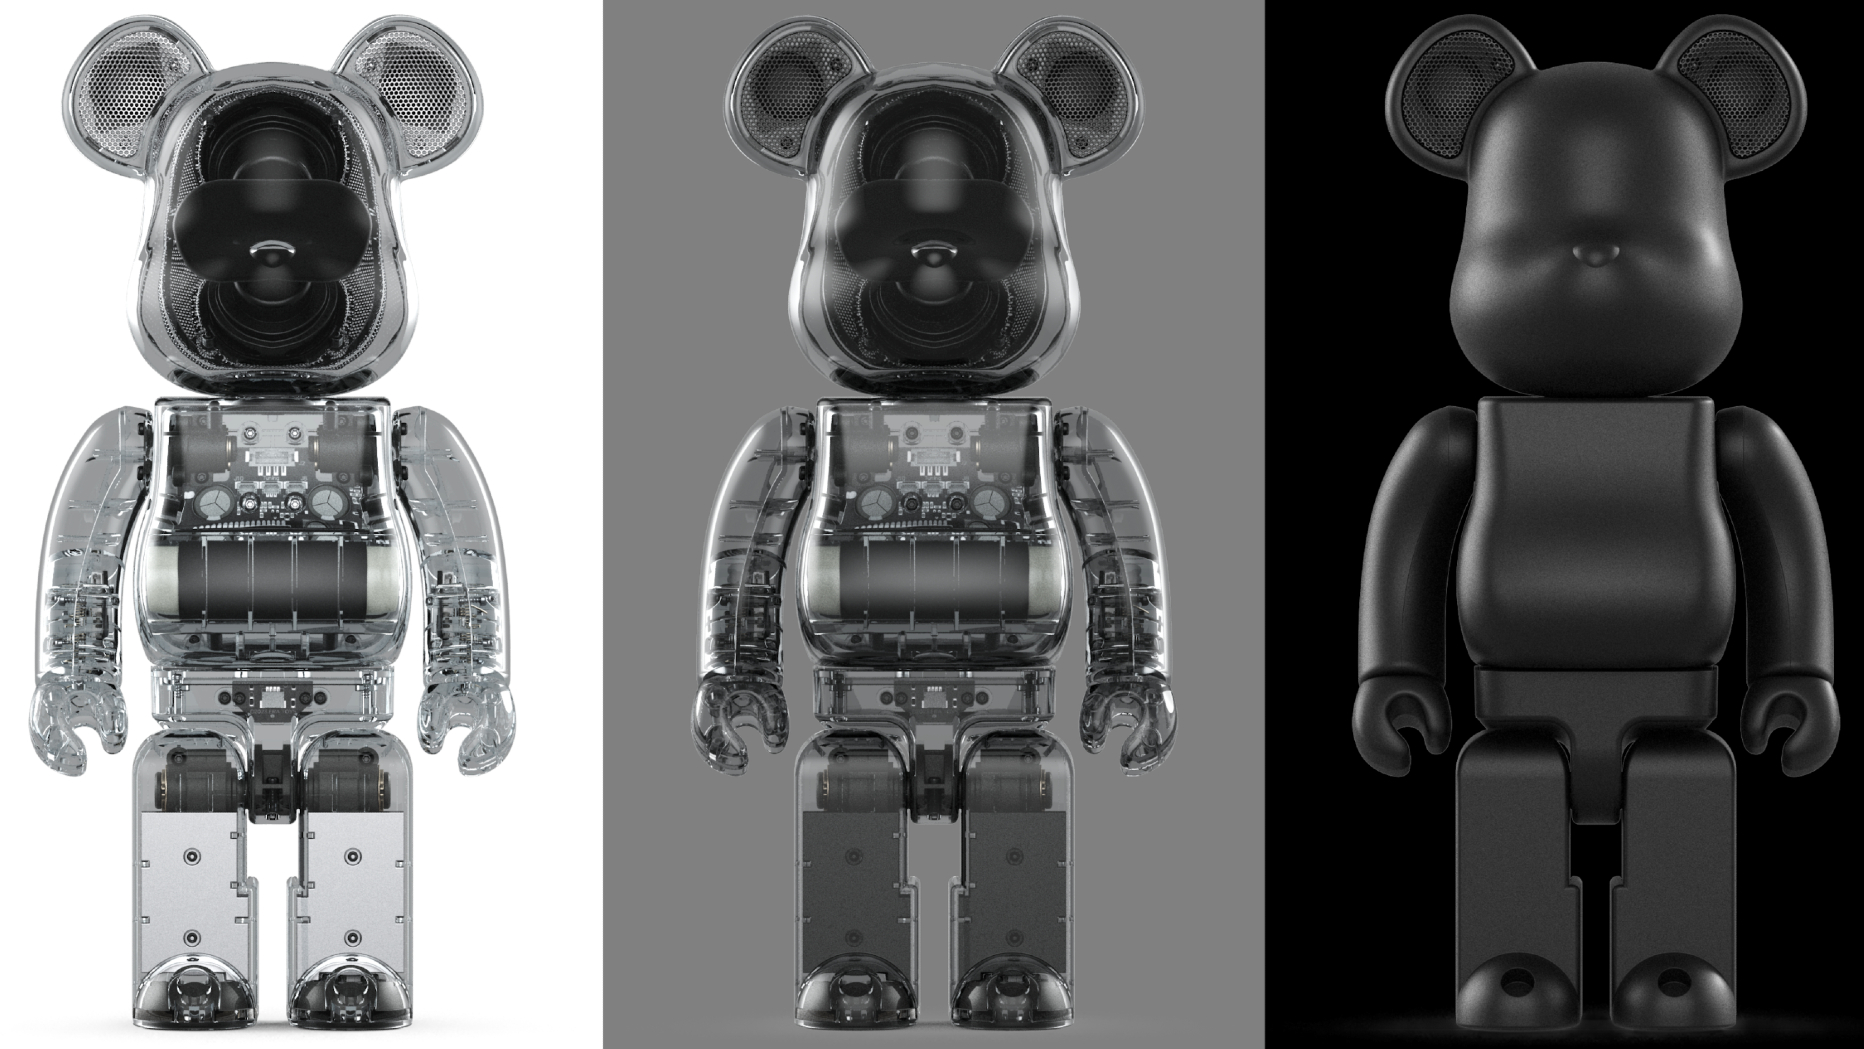 There's Y2K kitsch, and then there's this outrageously priced Bearbrick  Bluetooth speaker